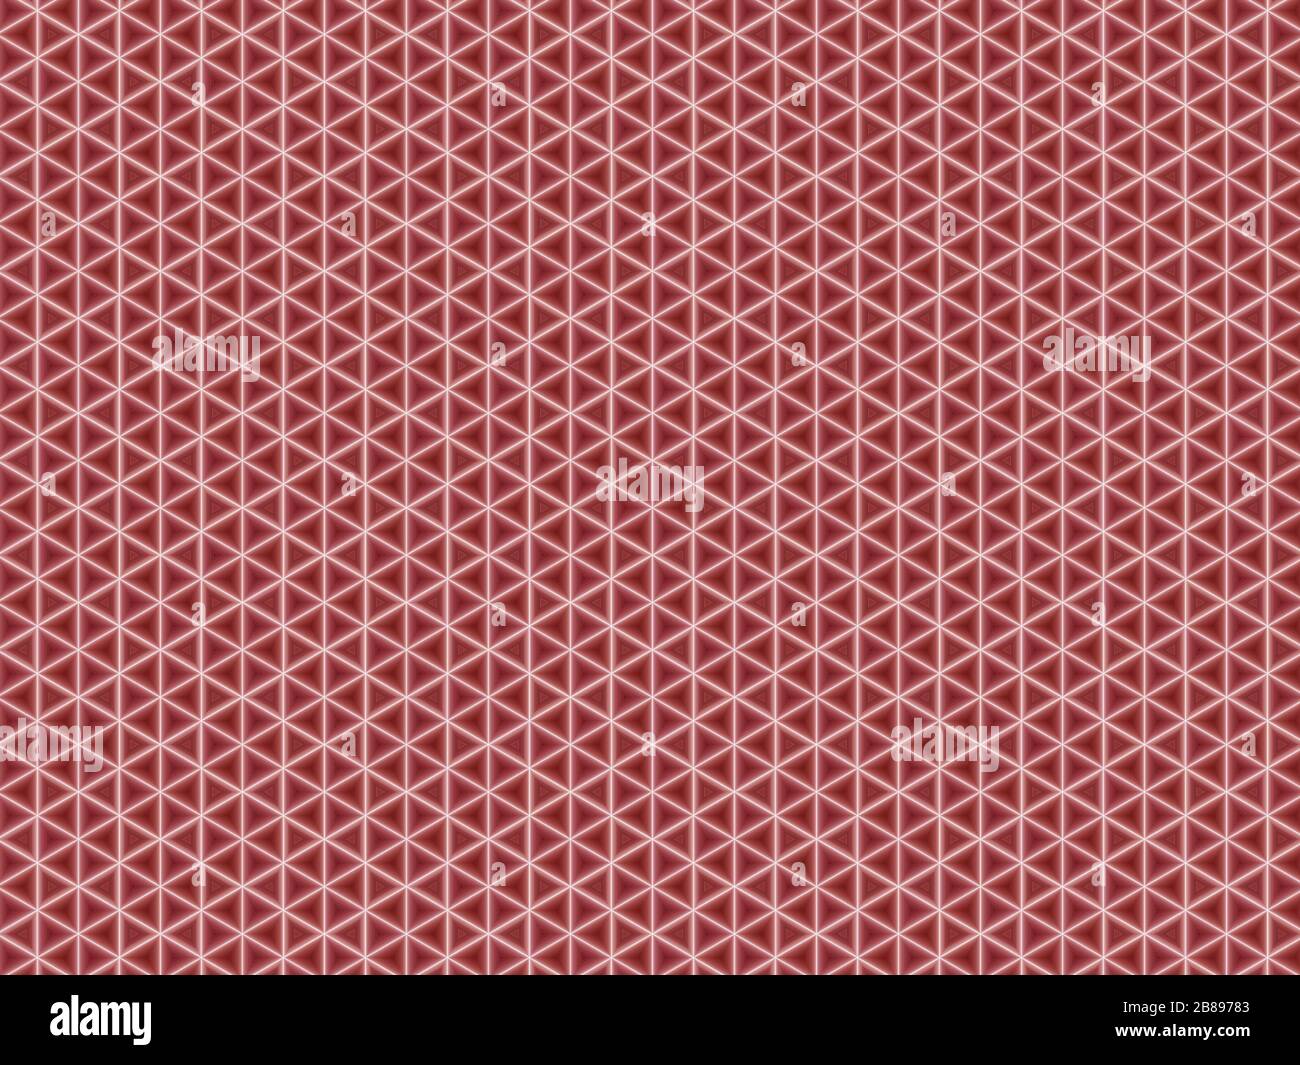 Abstract background advertising red, white, decorative geometric dynamic design background Stock Photo